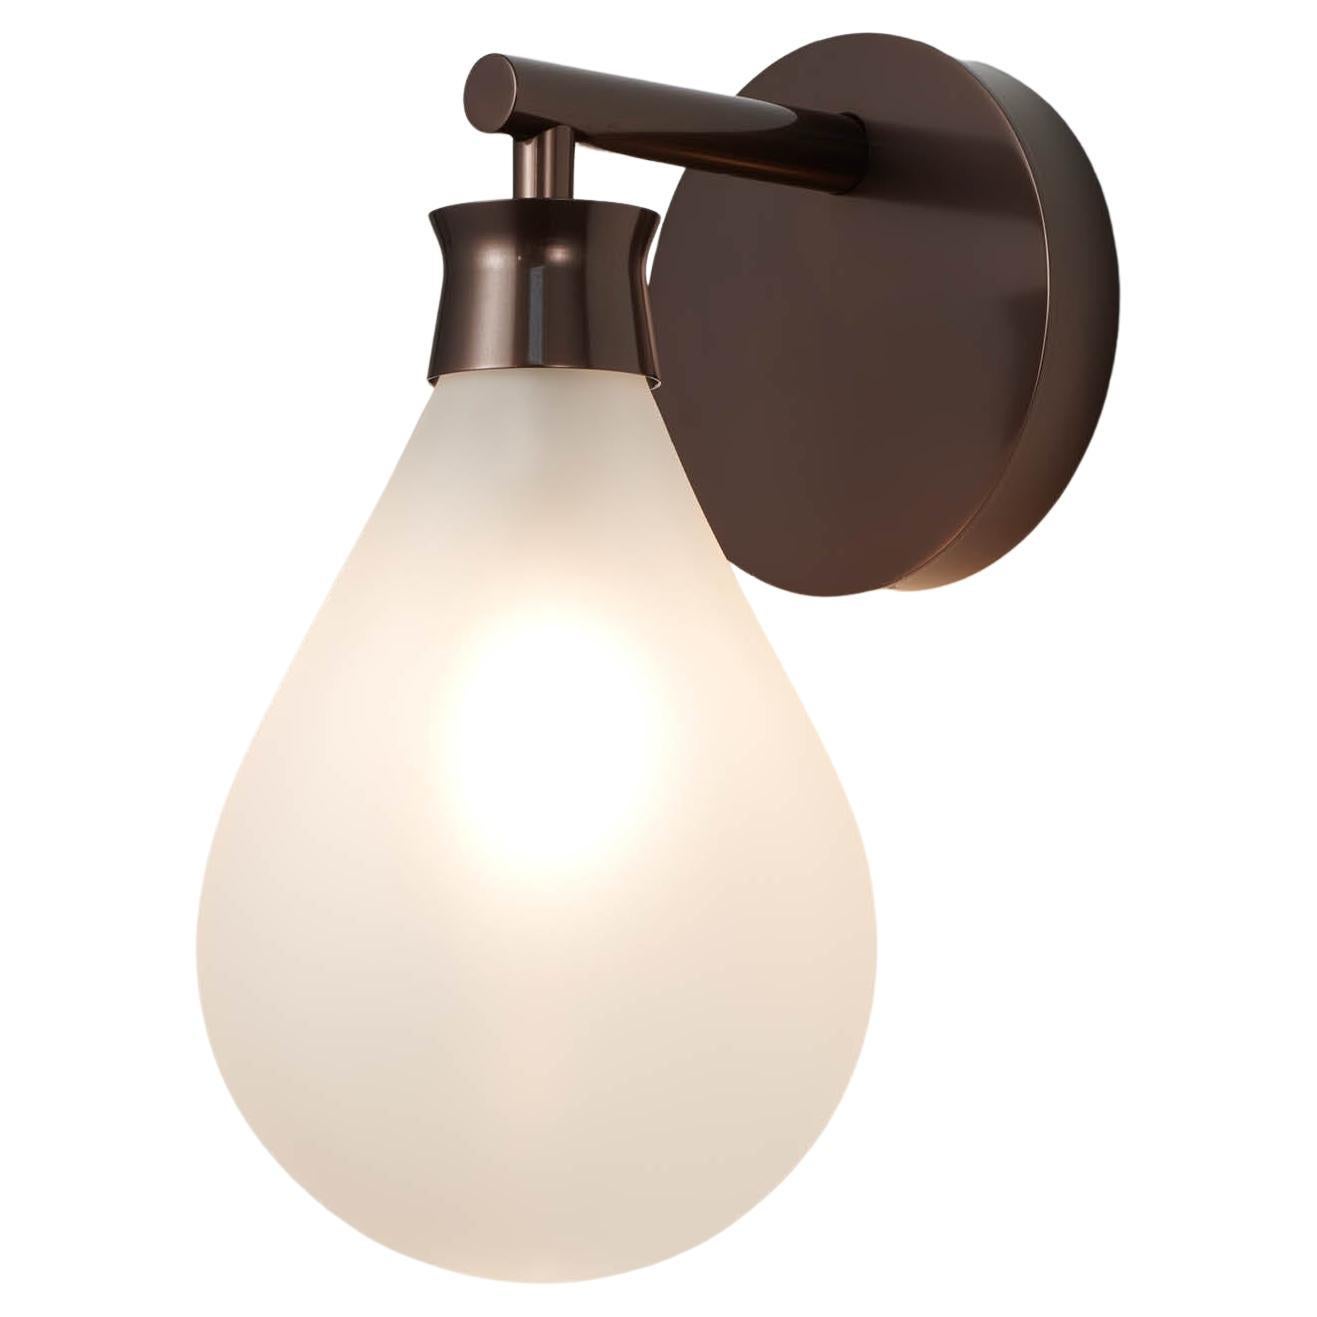 Cintola Wall Light in Satin Bronze with Frosted Handblown Glass Globe